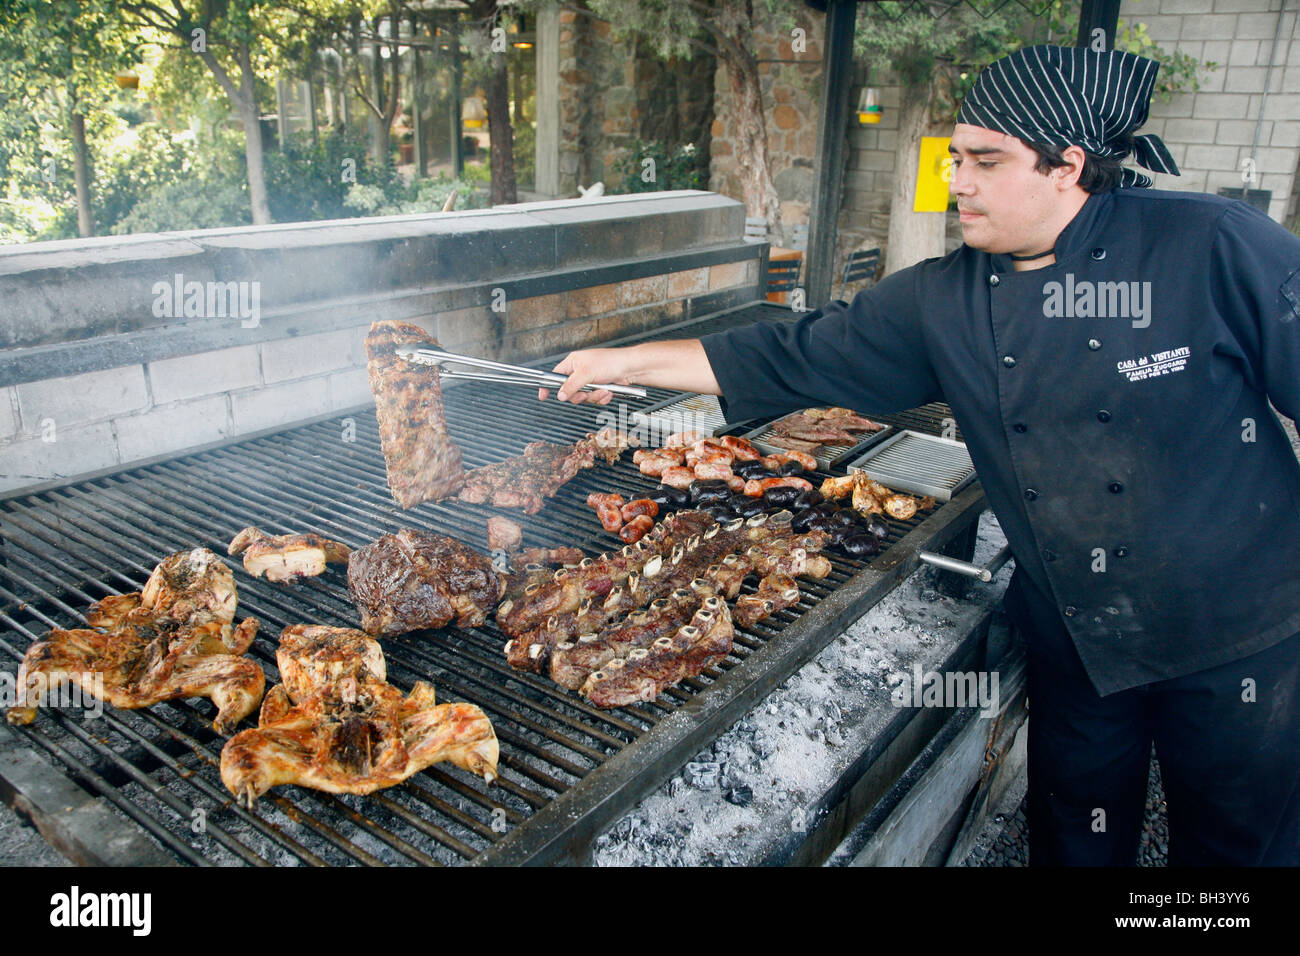 Meat grilled on the parilla in Casa del Visitante restaurant at the Zuccardi family winery in Maipu, Mendoza region, Argentina. Stock Photo